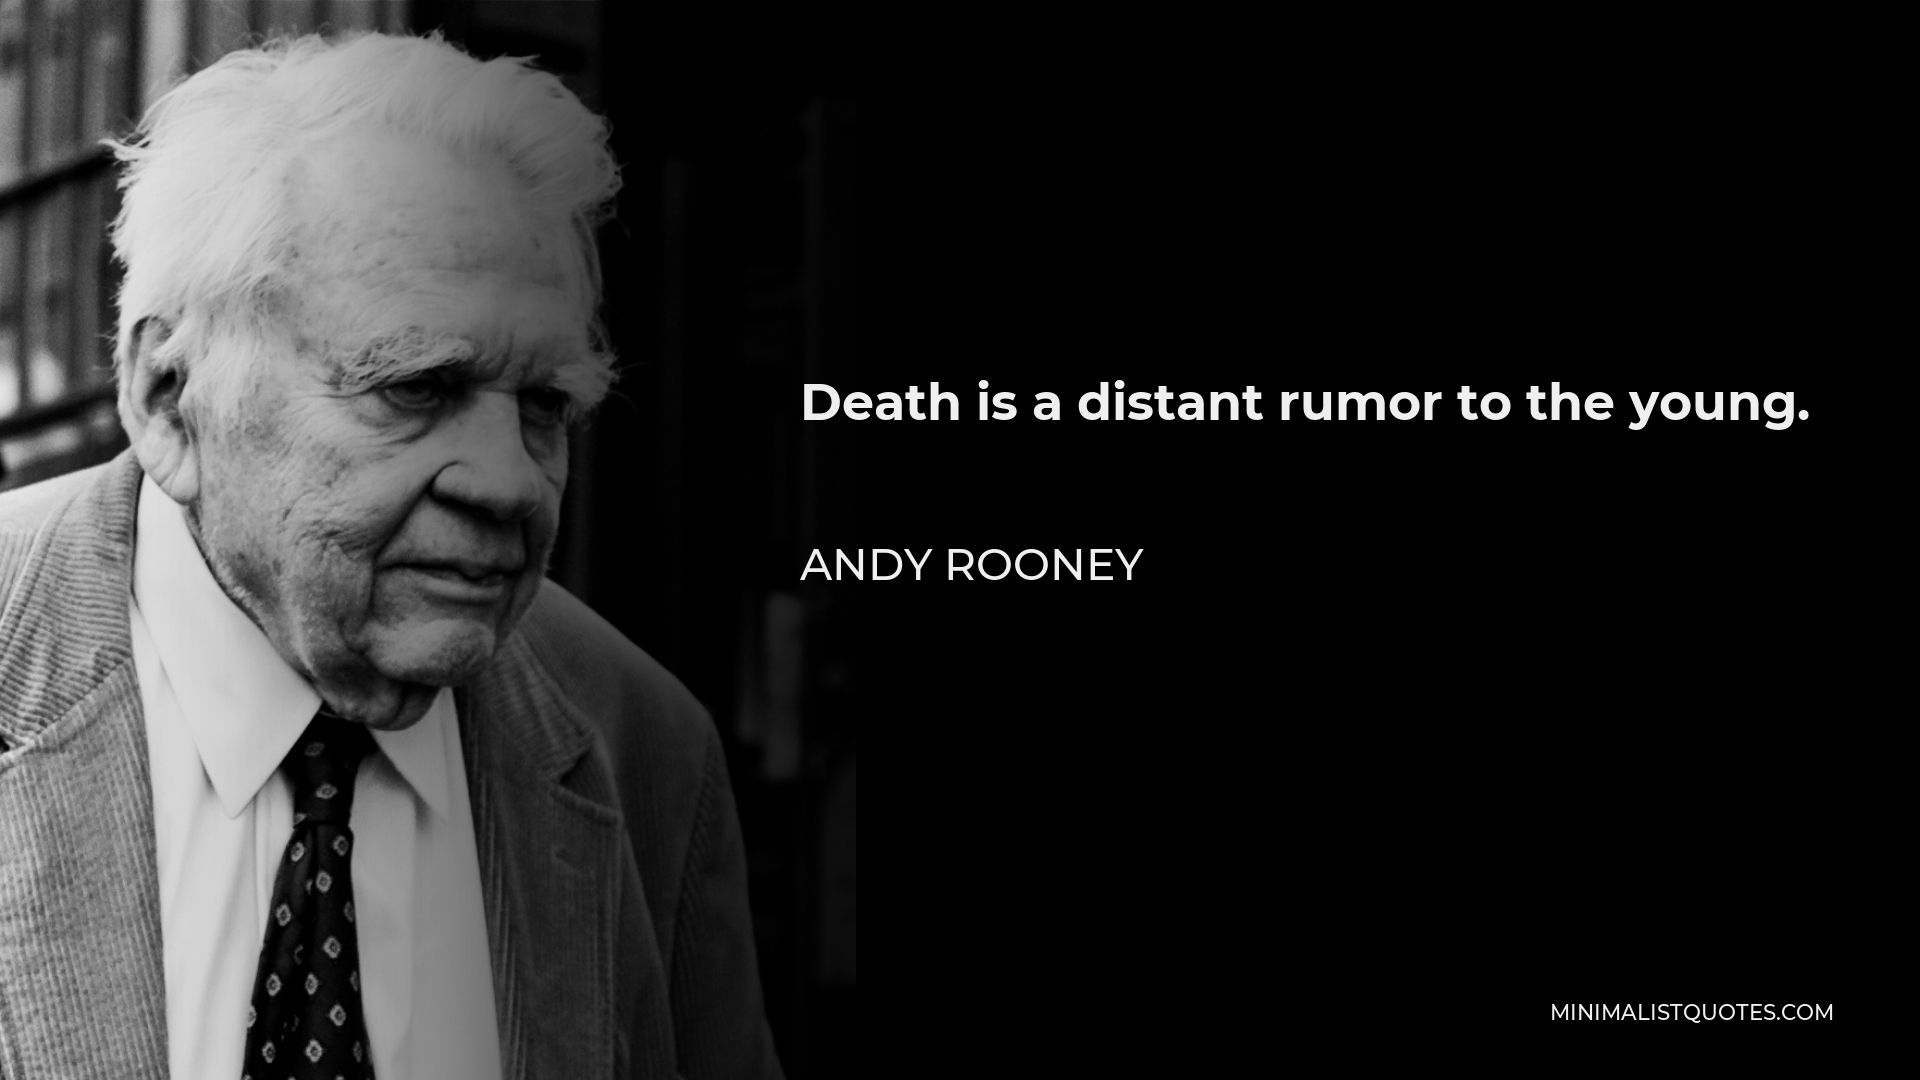 Andy Rooney Quote - Death is a distant rumor to the young.